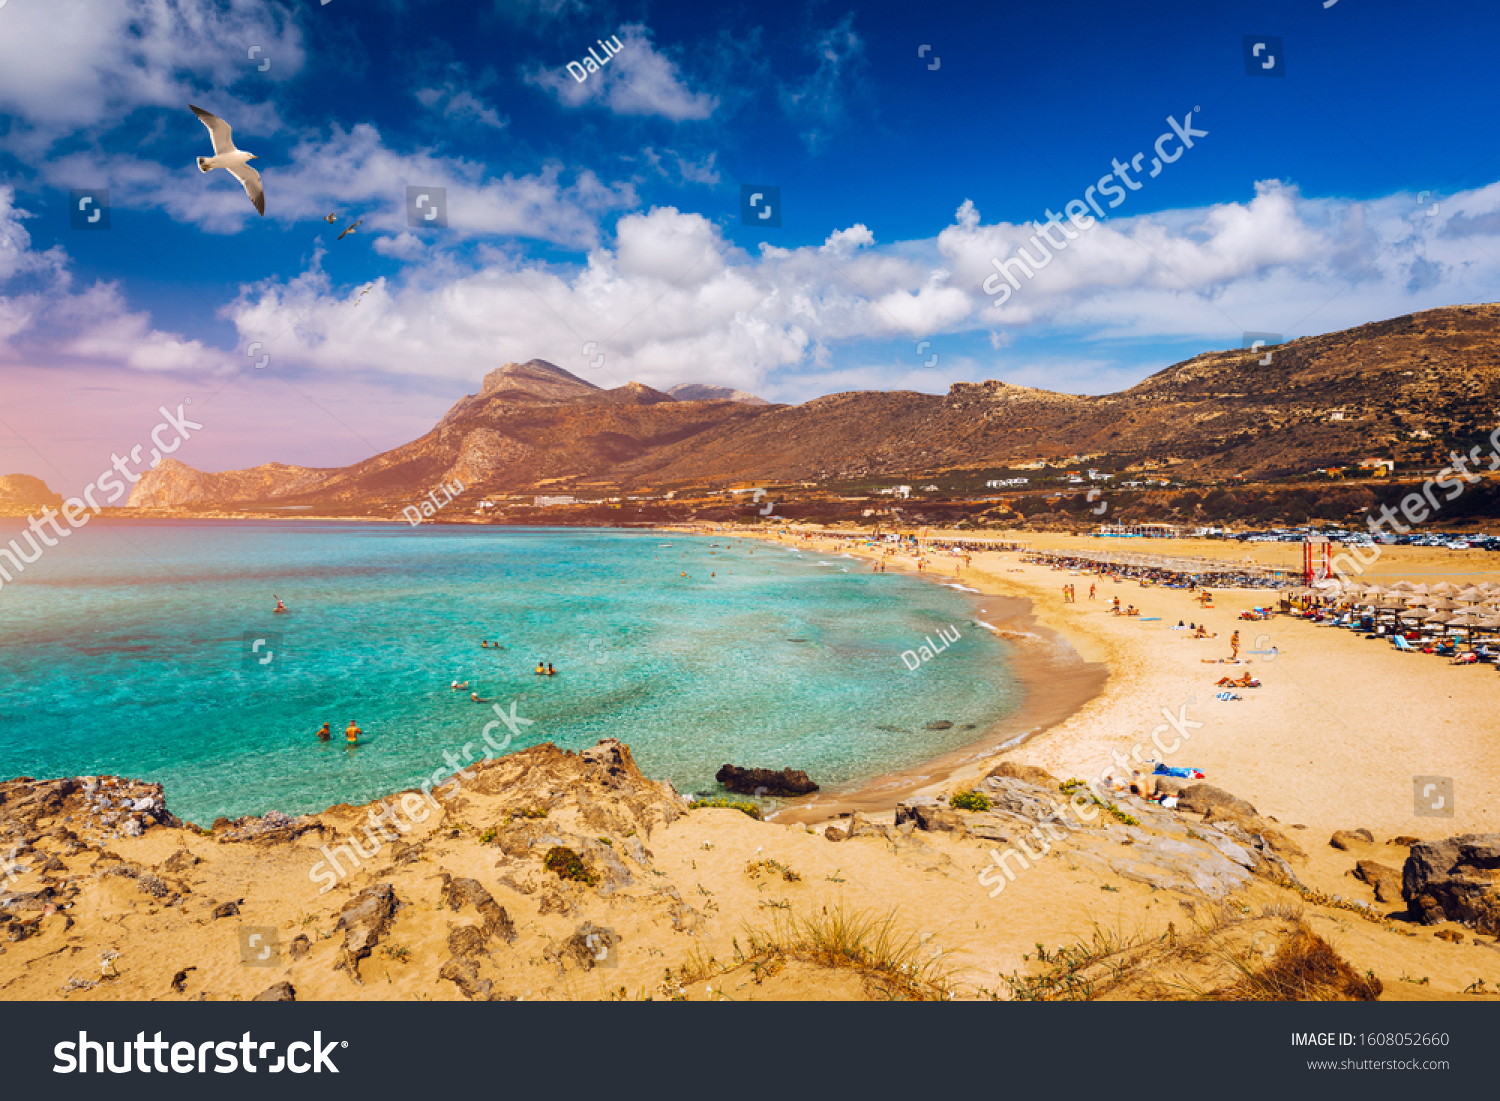 Panorama of turquoise beach Falasarna (Falassarna) in Crete with seagulls flying over, Greece. View of famous paradise sandy deep turquoise beach of Falasarna (Phalasarna), Crete island, Greece. #1608052660